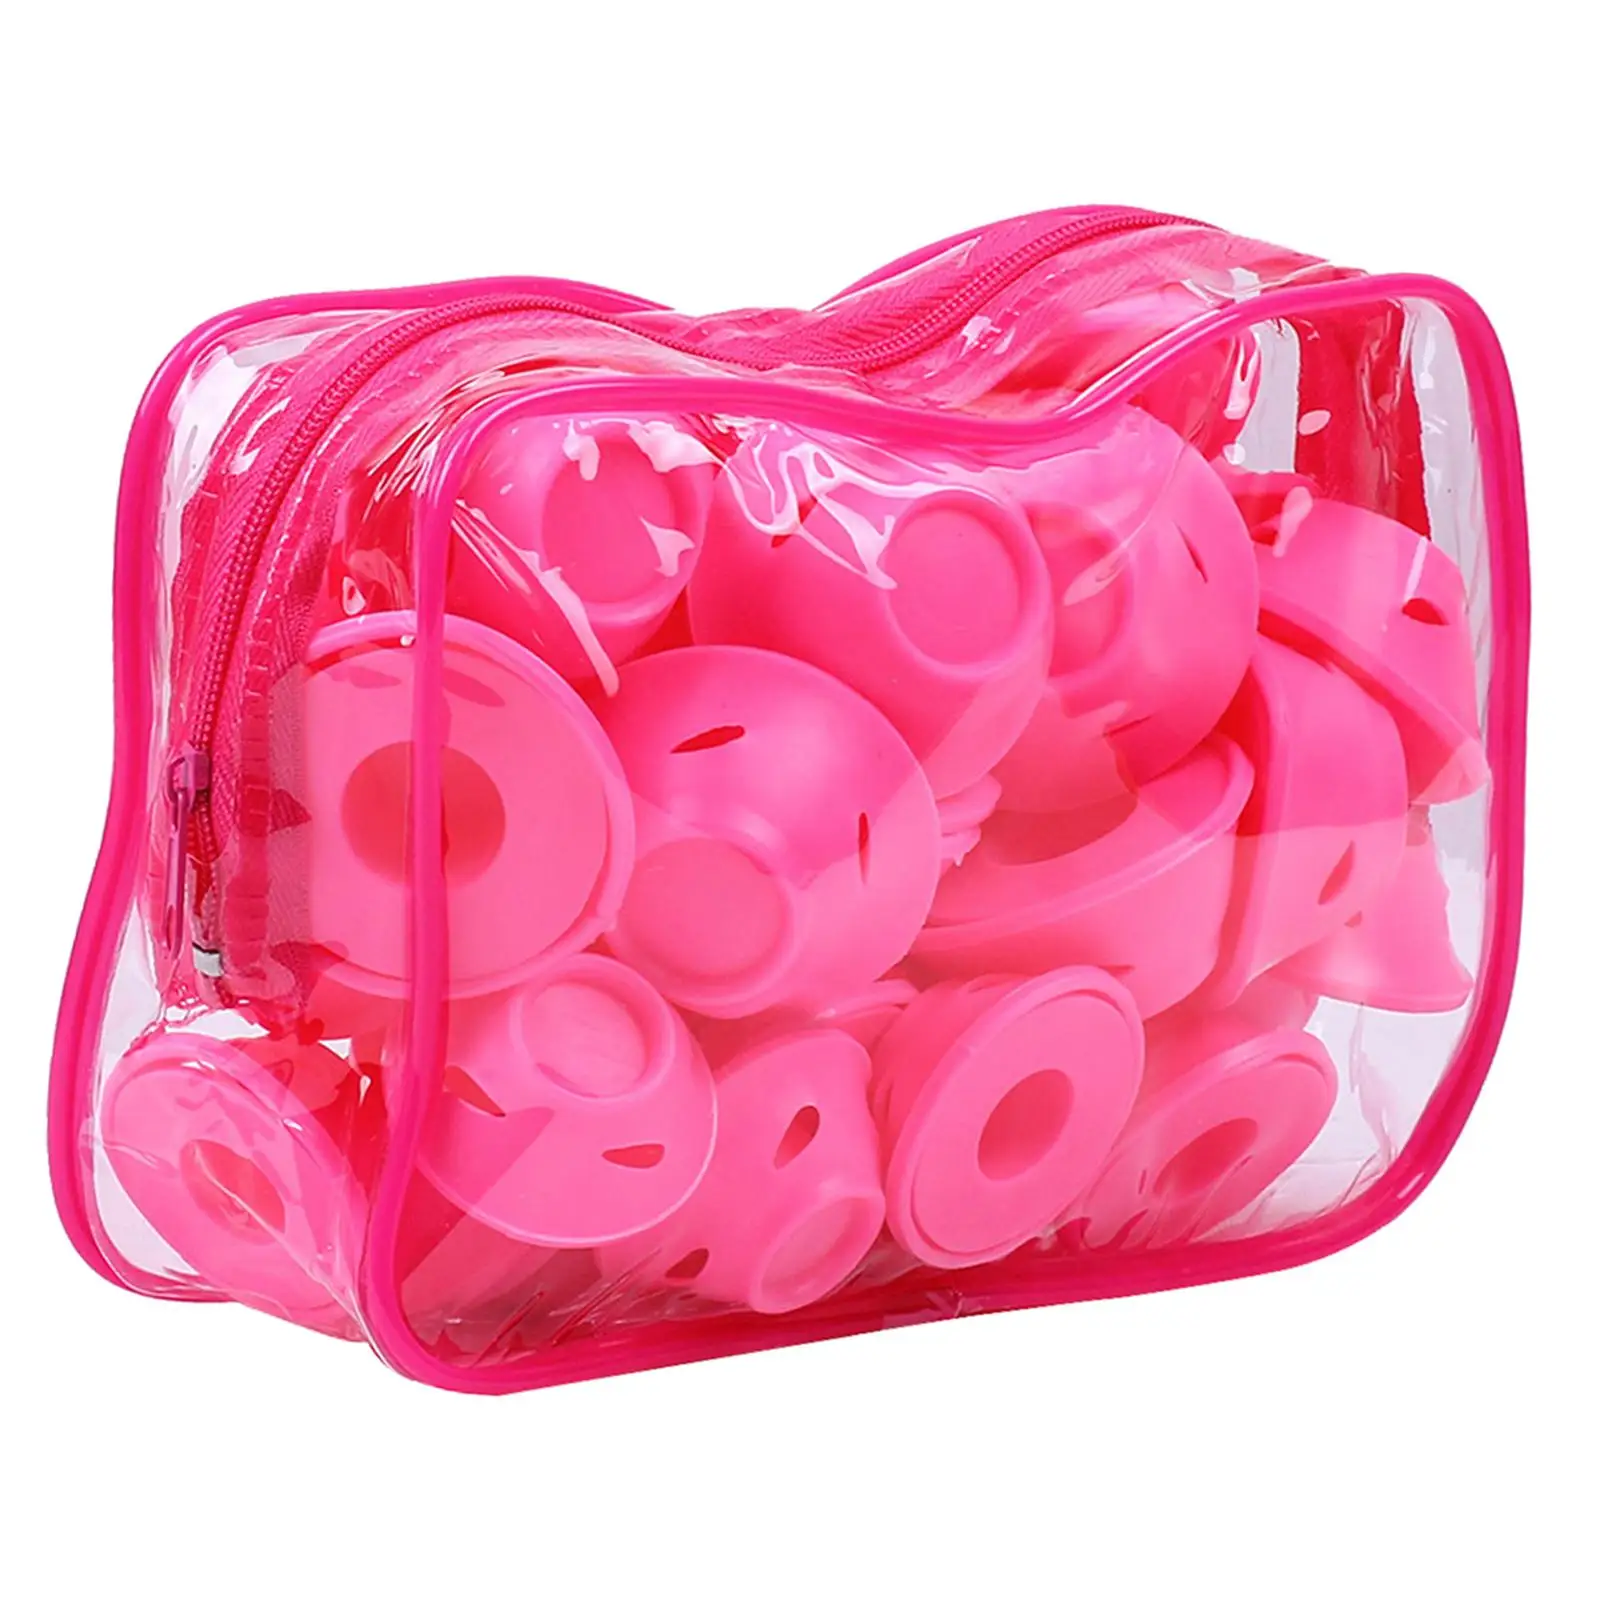 30x Hair Rollers Mushroom Design Silicone No Heat Curling for Natural Curls